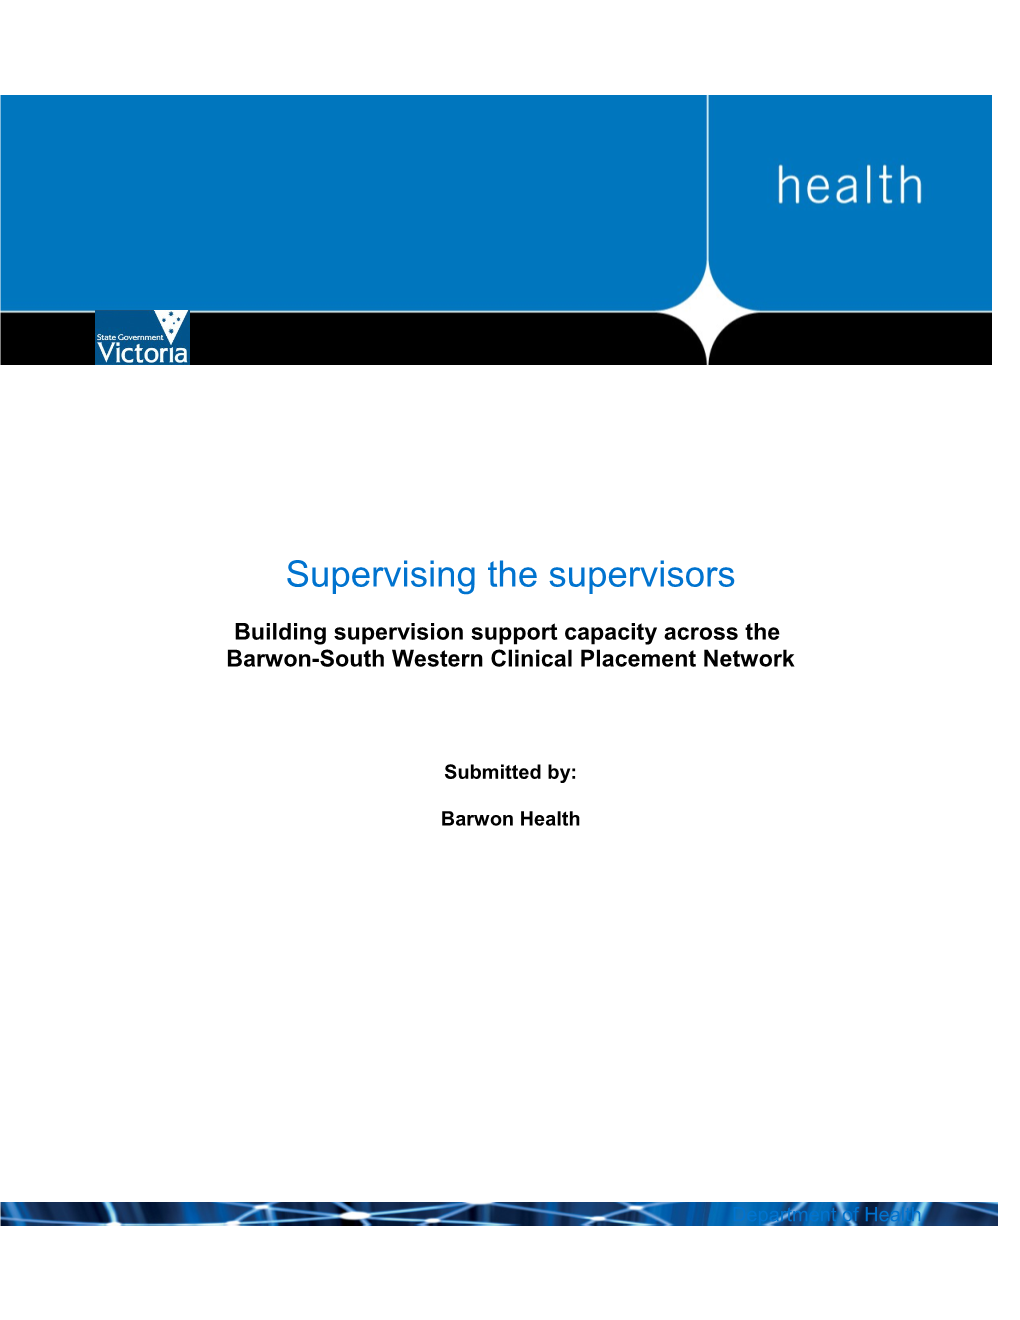 Building Supervision Support Capacity Across the Barwon-South Western Clinical Placement